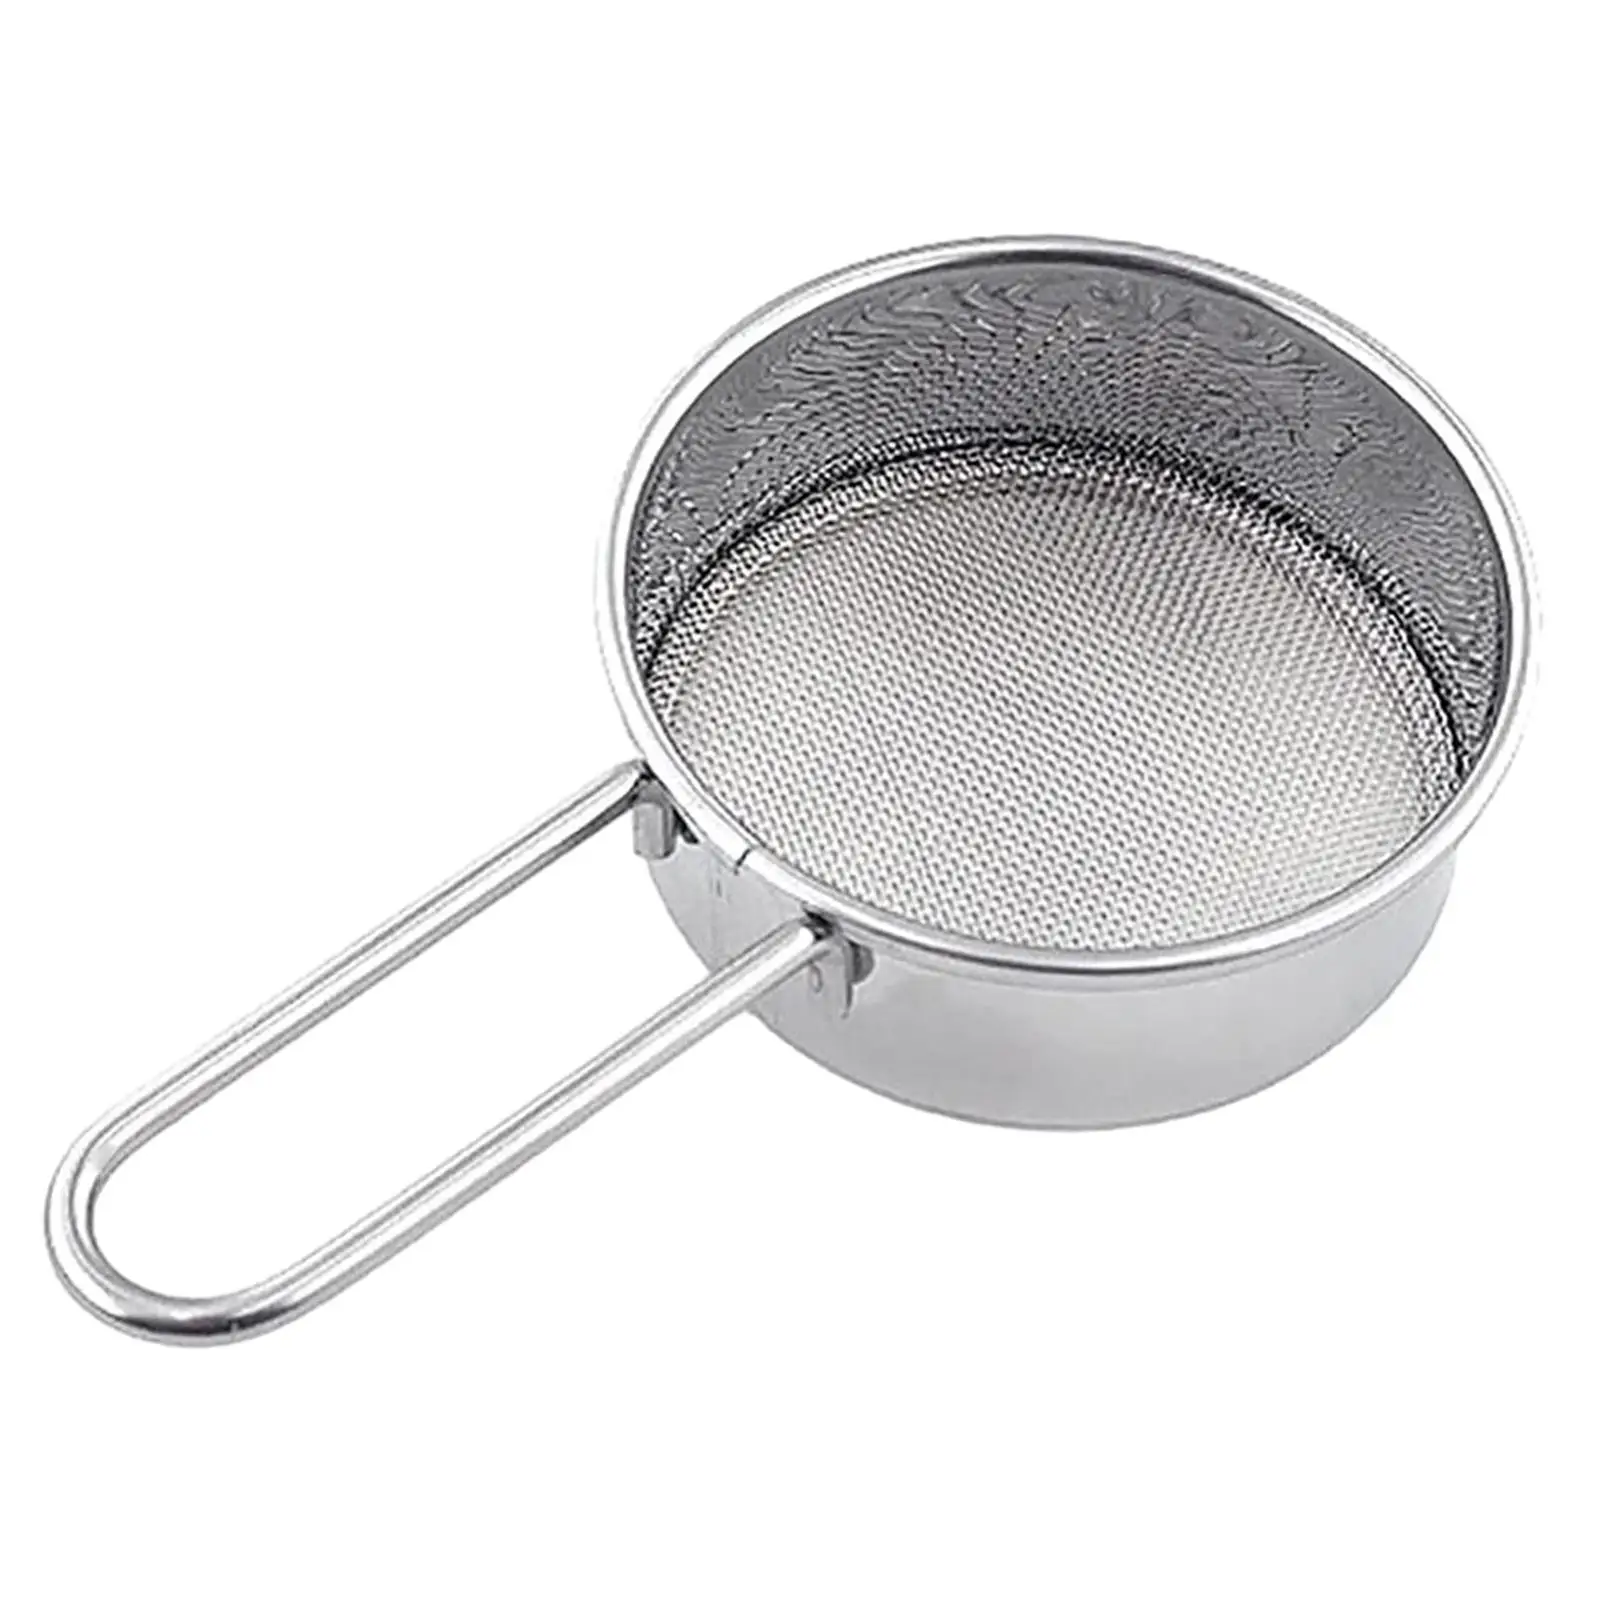 Flour Sifter Flour Sifter Drainer 40 Fine Mesh Strainers Baking Tools Stainless Steel Strainer Small Strainer for Tea Baking